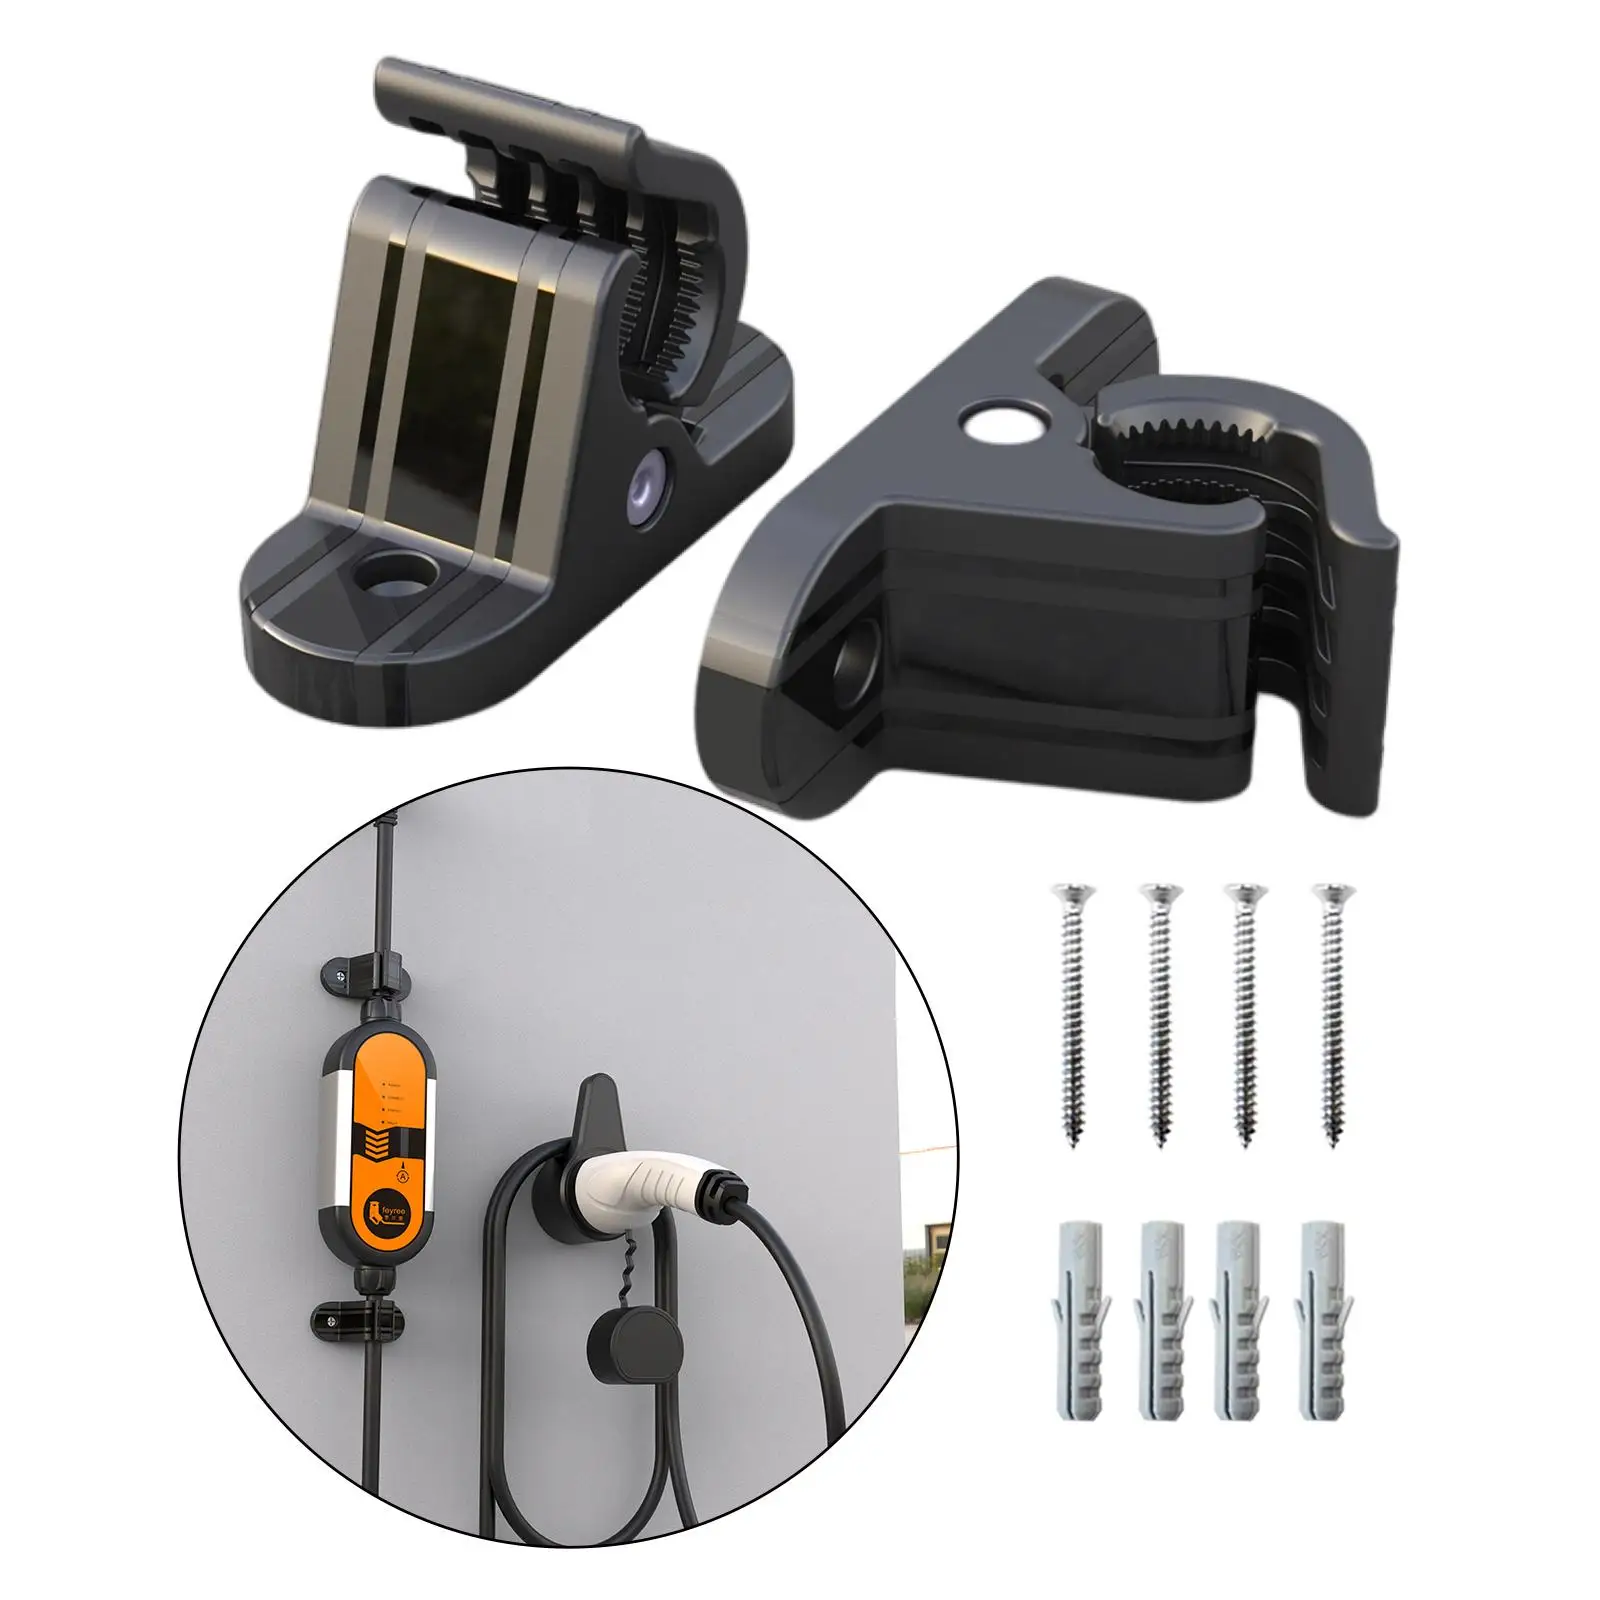 

Bracket Clamp Wall Mount Connector Holster Fixed Clip Portable Charger Holder Fit for Electric Car Electric Vehicle EV